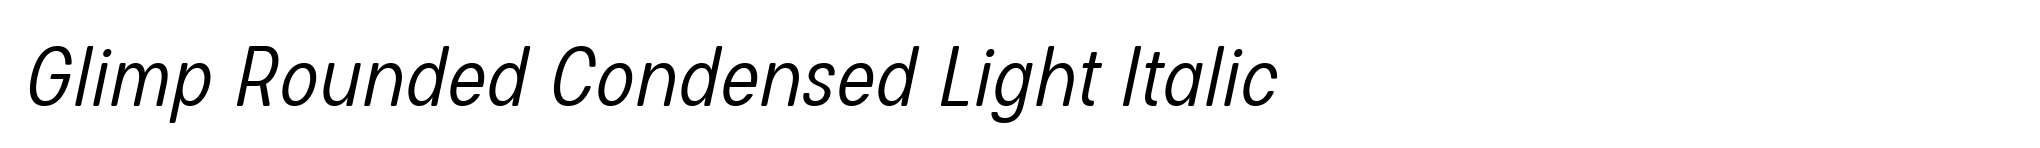 Glimp Rounded Condensed Light Italic image